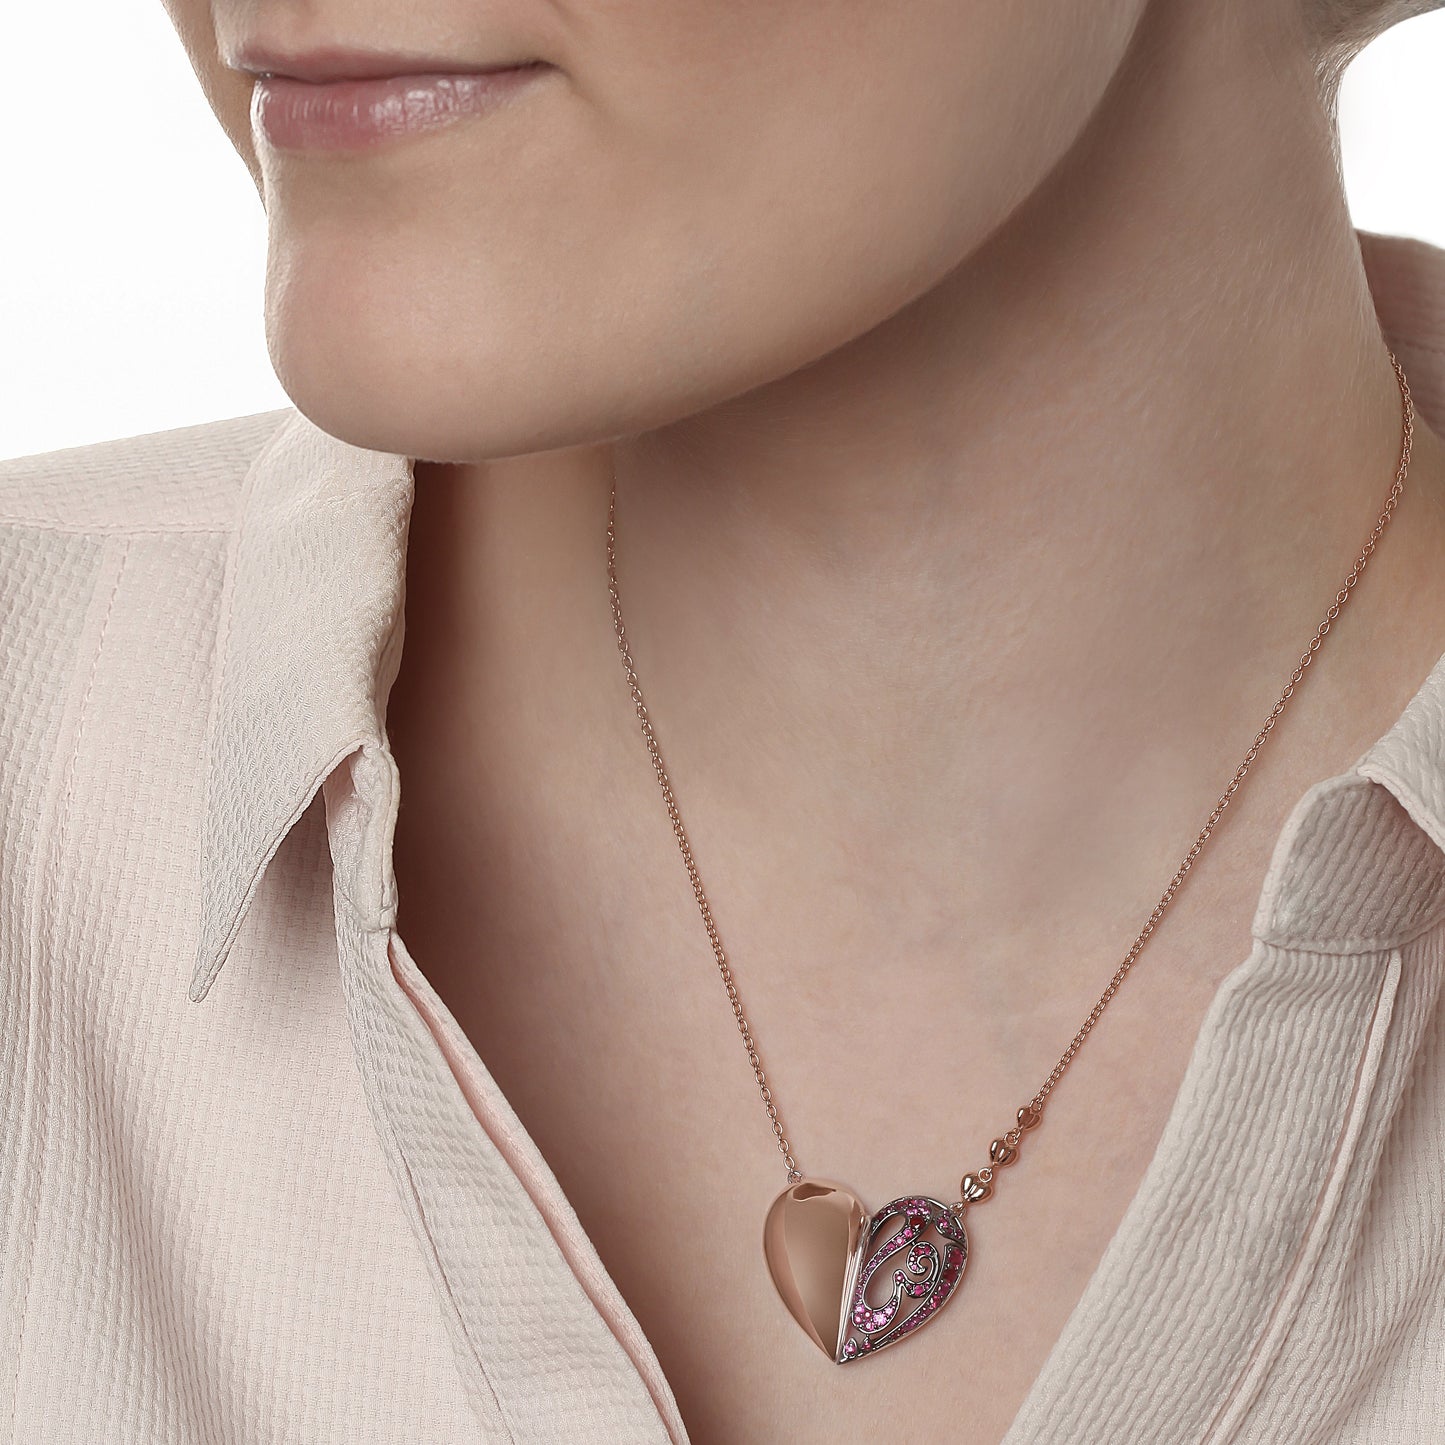 The Mothers' Day Edition - Heart Shaped Custom Arabic Letter "Mother" Rose Gold & Ruby Precious Stones Necklace | Ladies Necklace